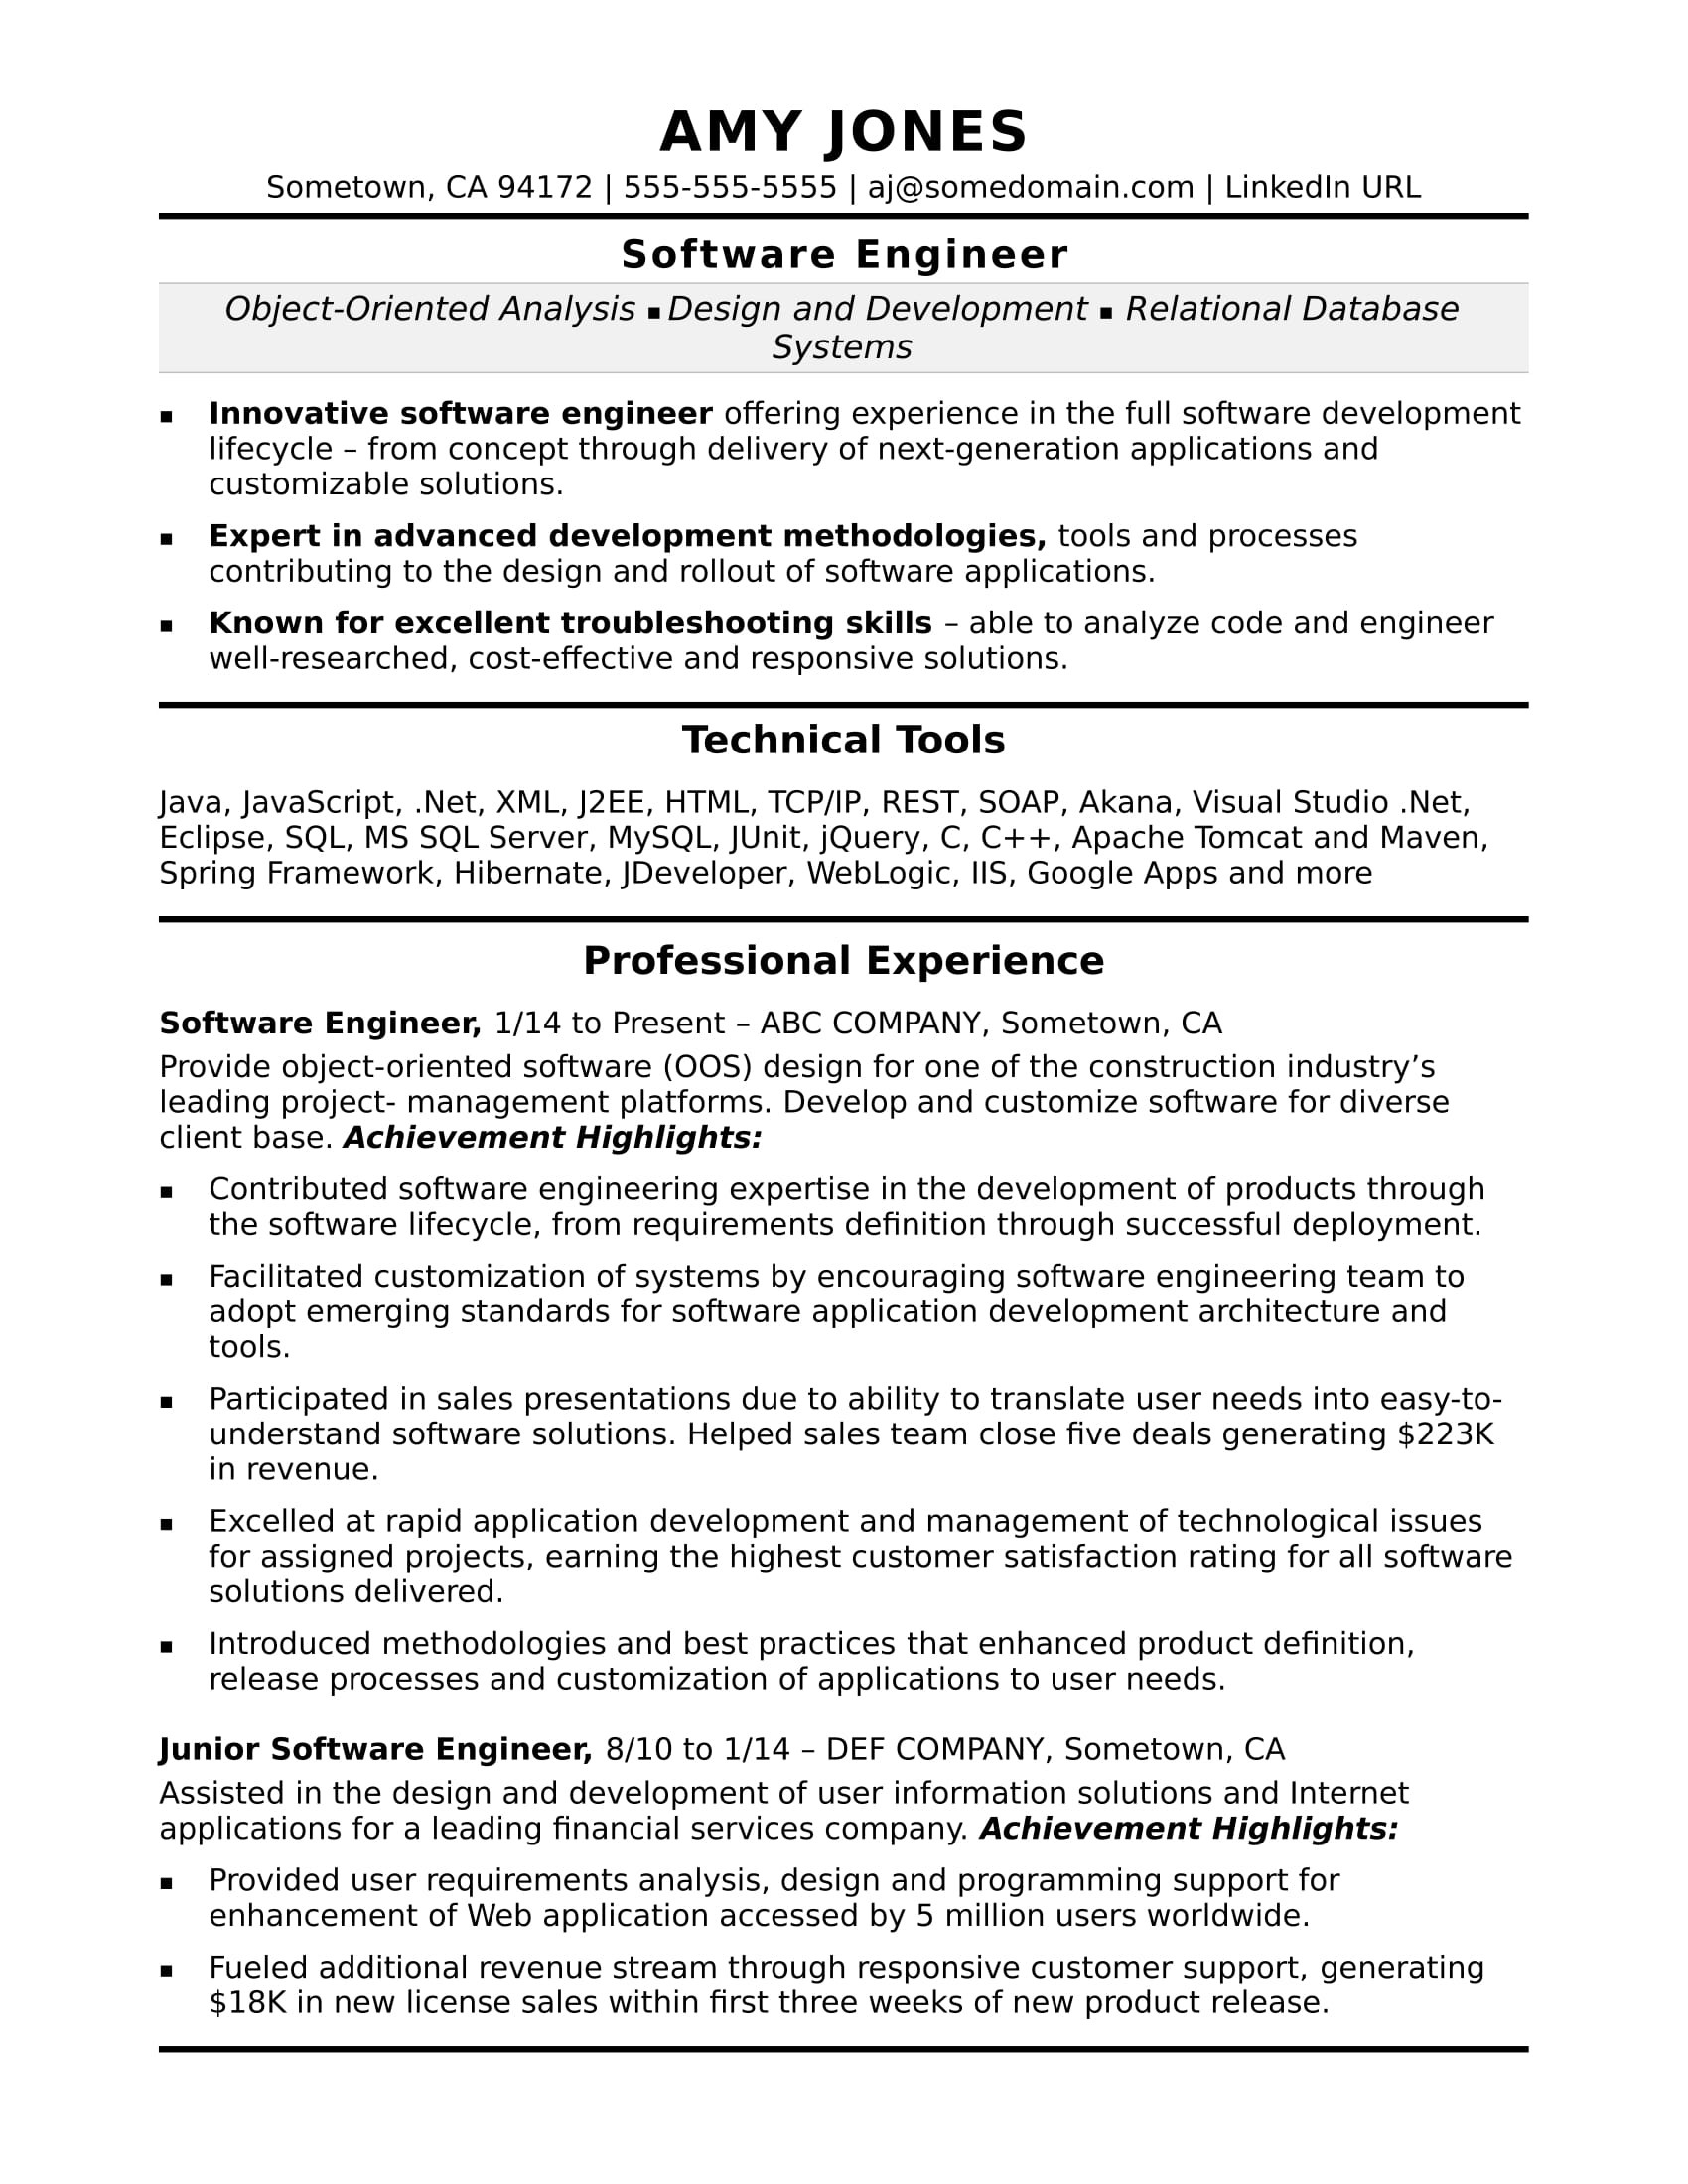 Best Resume Templates for software Engineers Midlevel software Engineer Resume Sample Monster.com